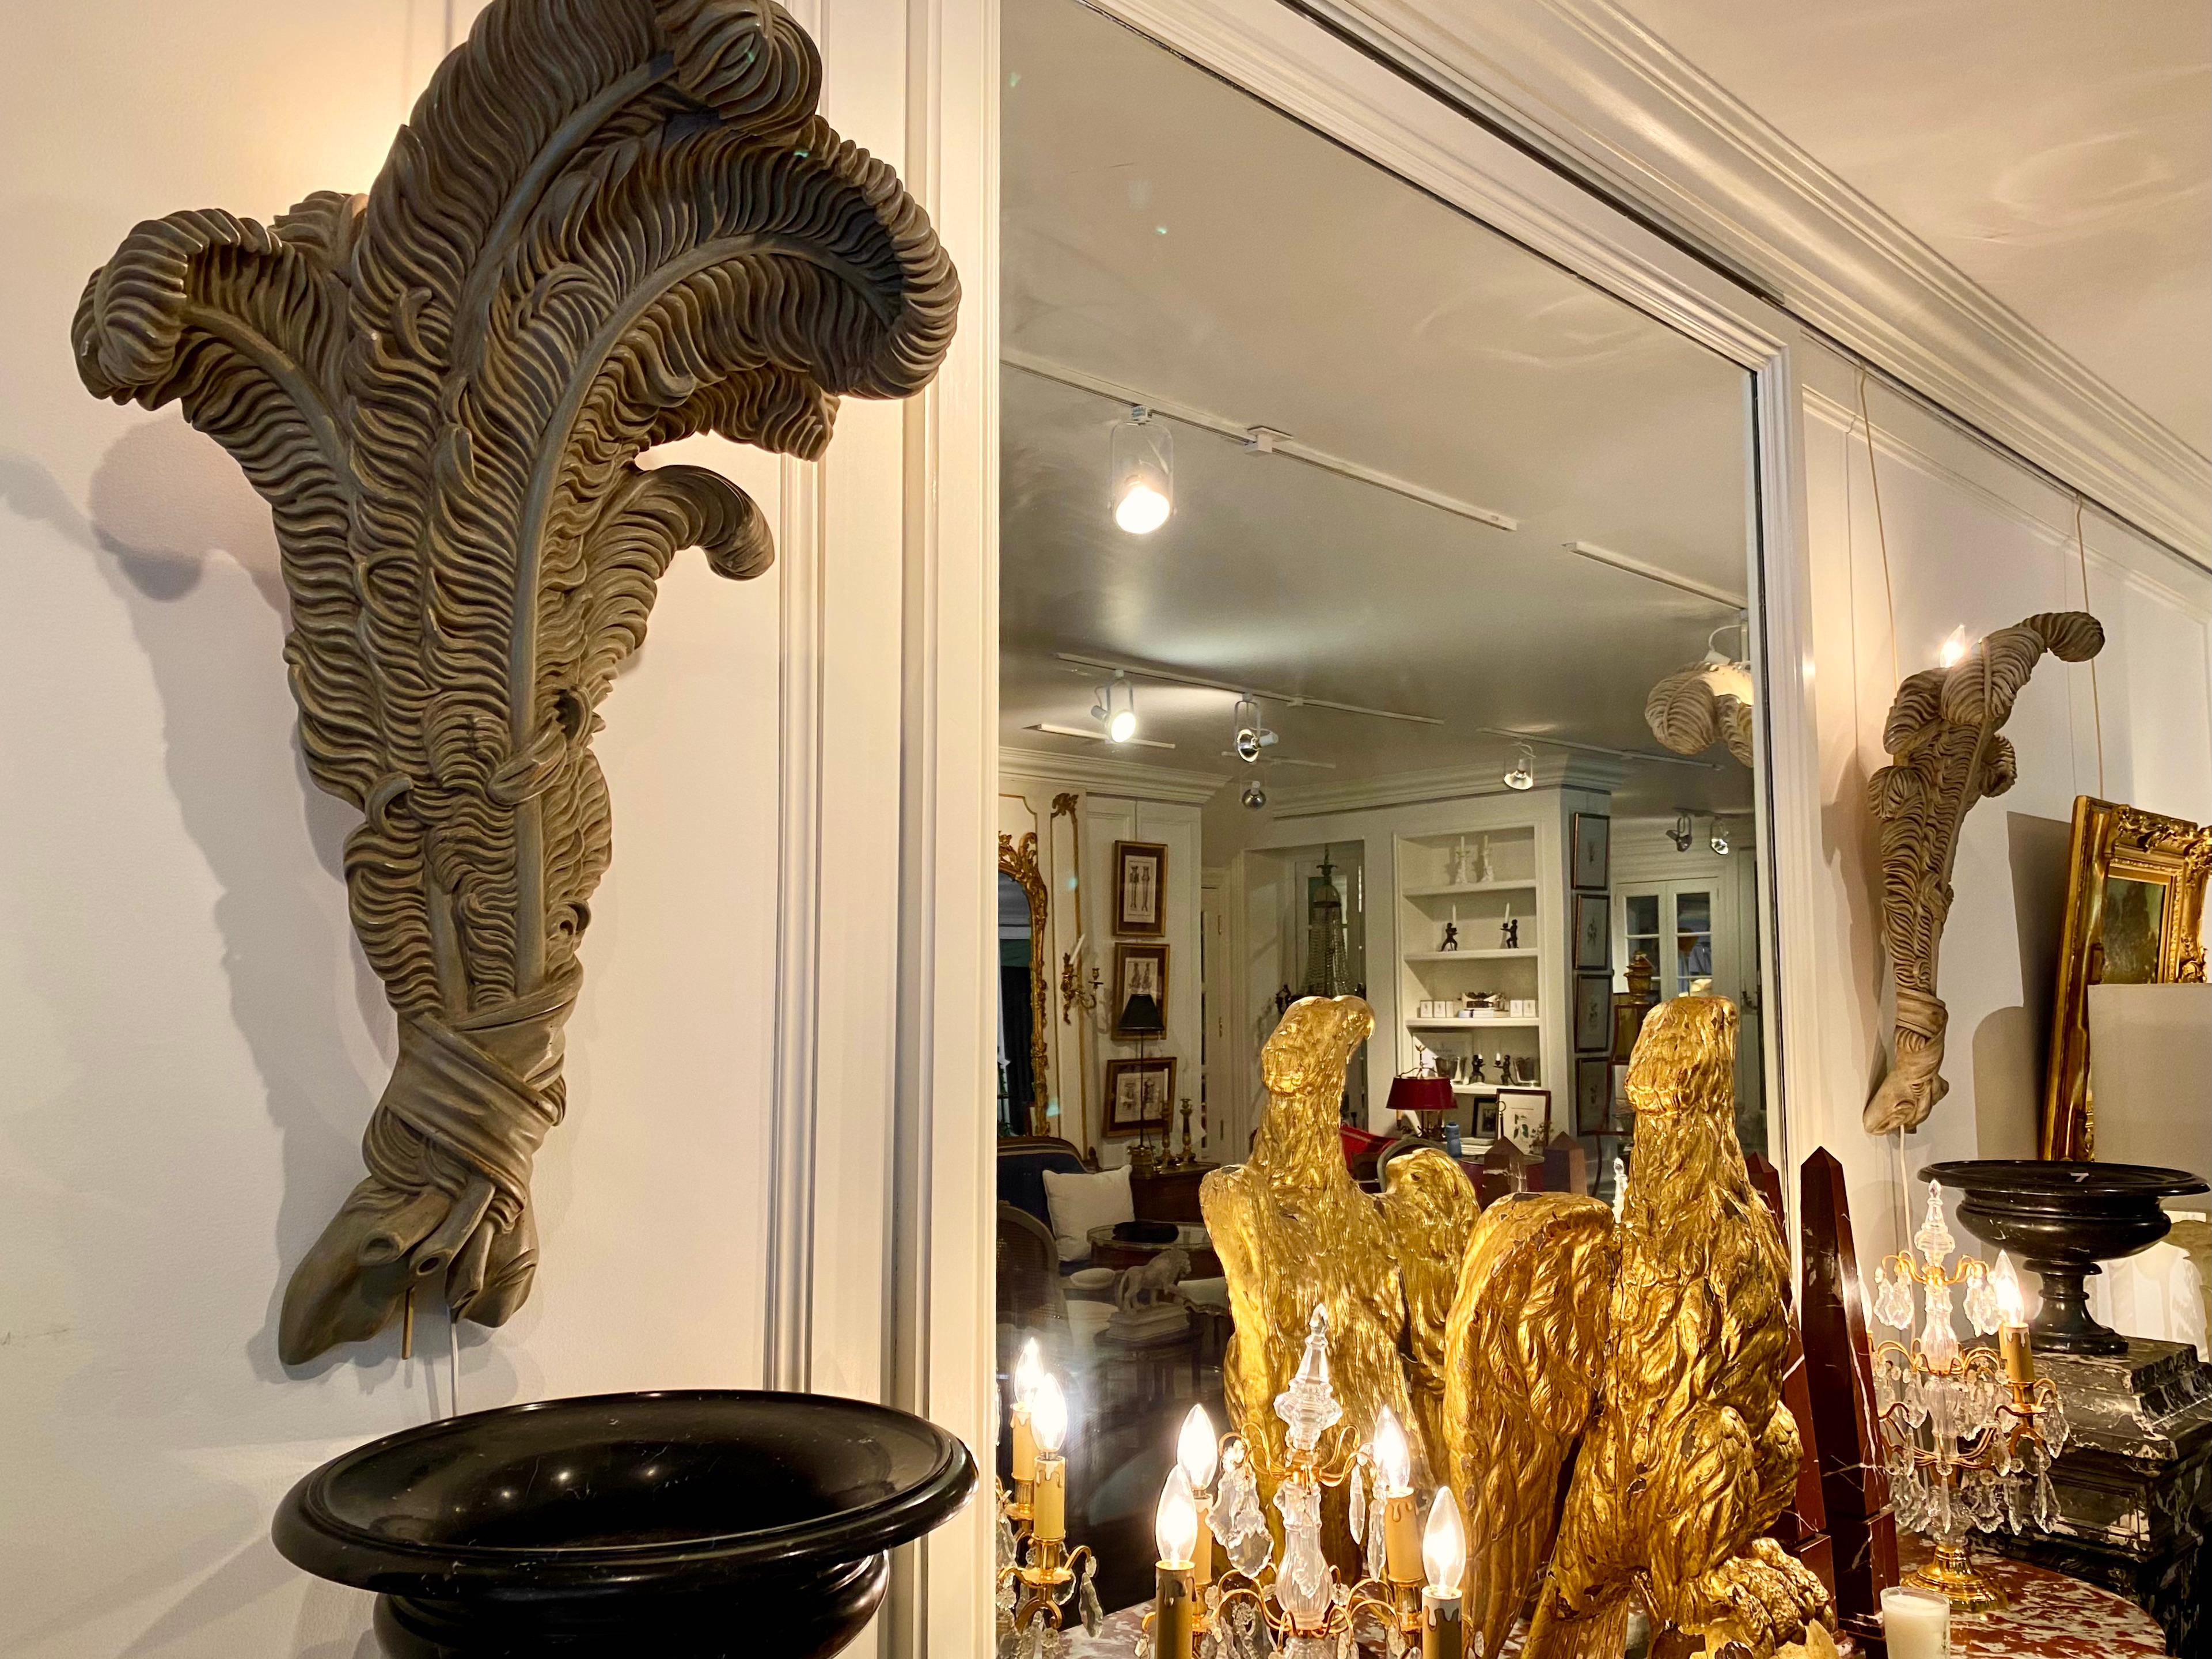 Large pair of Maison Jansen feather sconces, Trianon Ggey patina.
Large, rare and exceptionnal pair of Maison Jansen feather sconces, inspired by the Prince of Wales Feathers.
Stéphane Boudin of Maison Jansen worked with the Duke of Windsor,